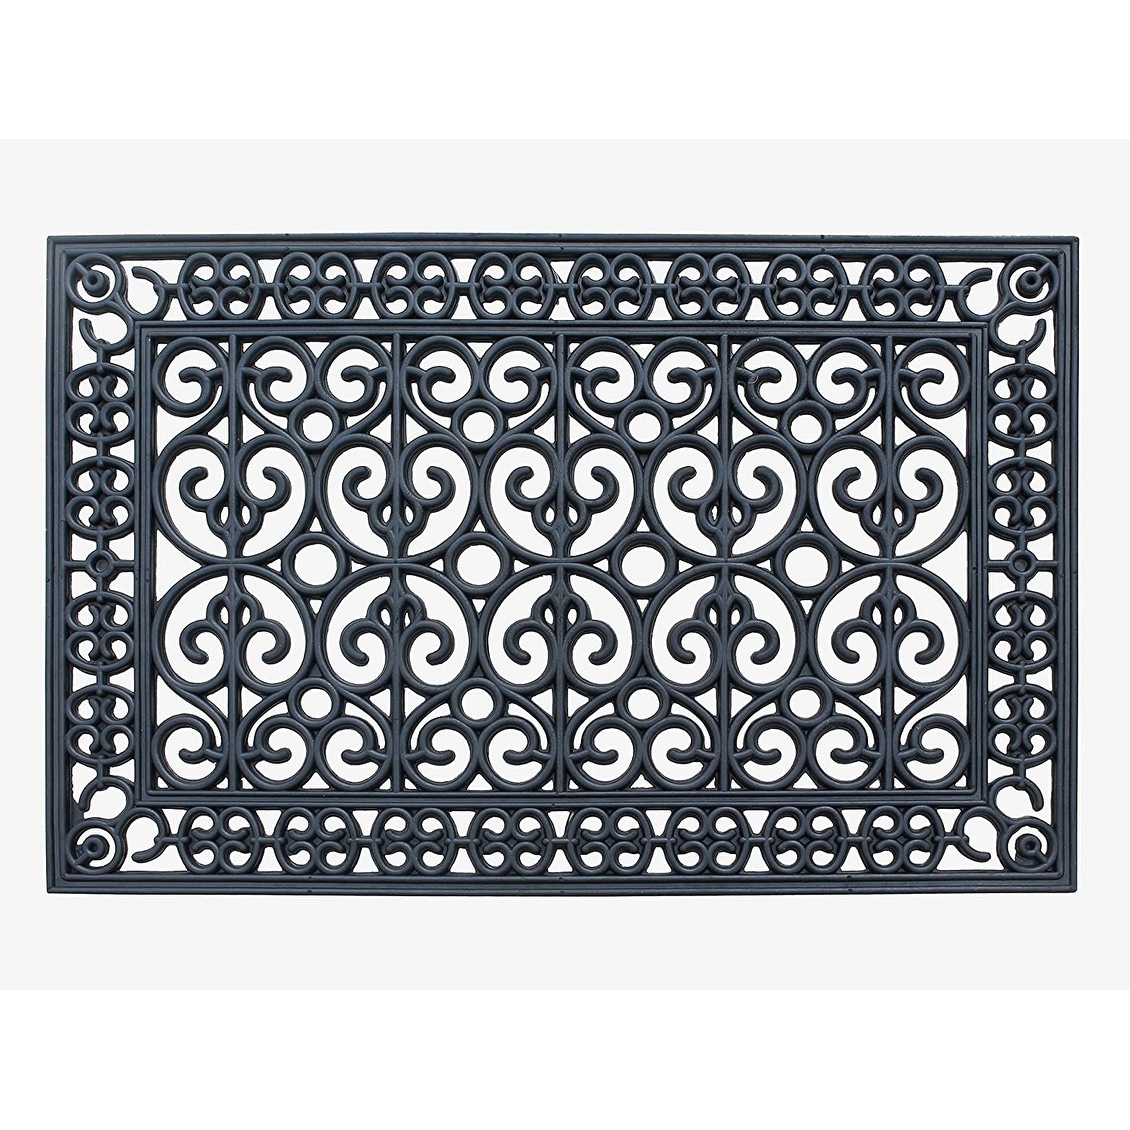 A1 Home Collections A1HC Black 24 in. x 36 in. Rubber Grill Indoor/Outdoor  Non-Slip Durable Door Mat A1HOME200152 - The Home Depot